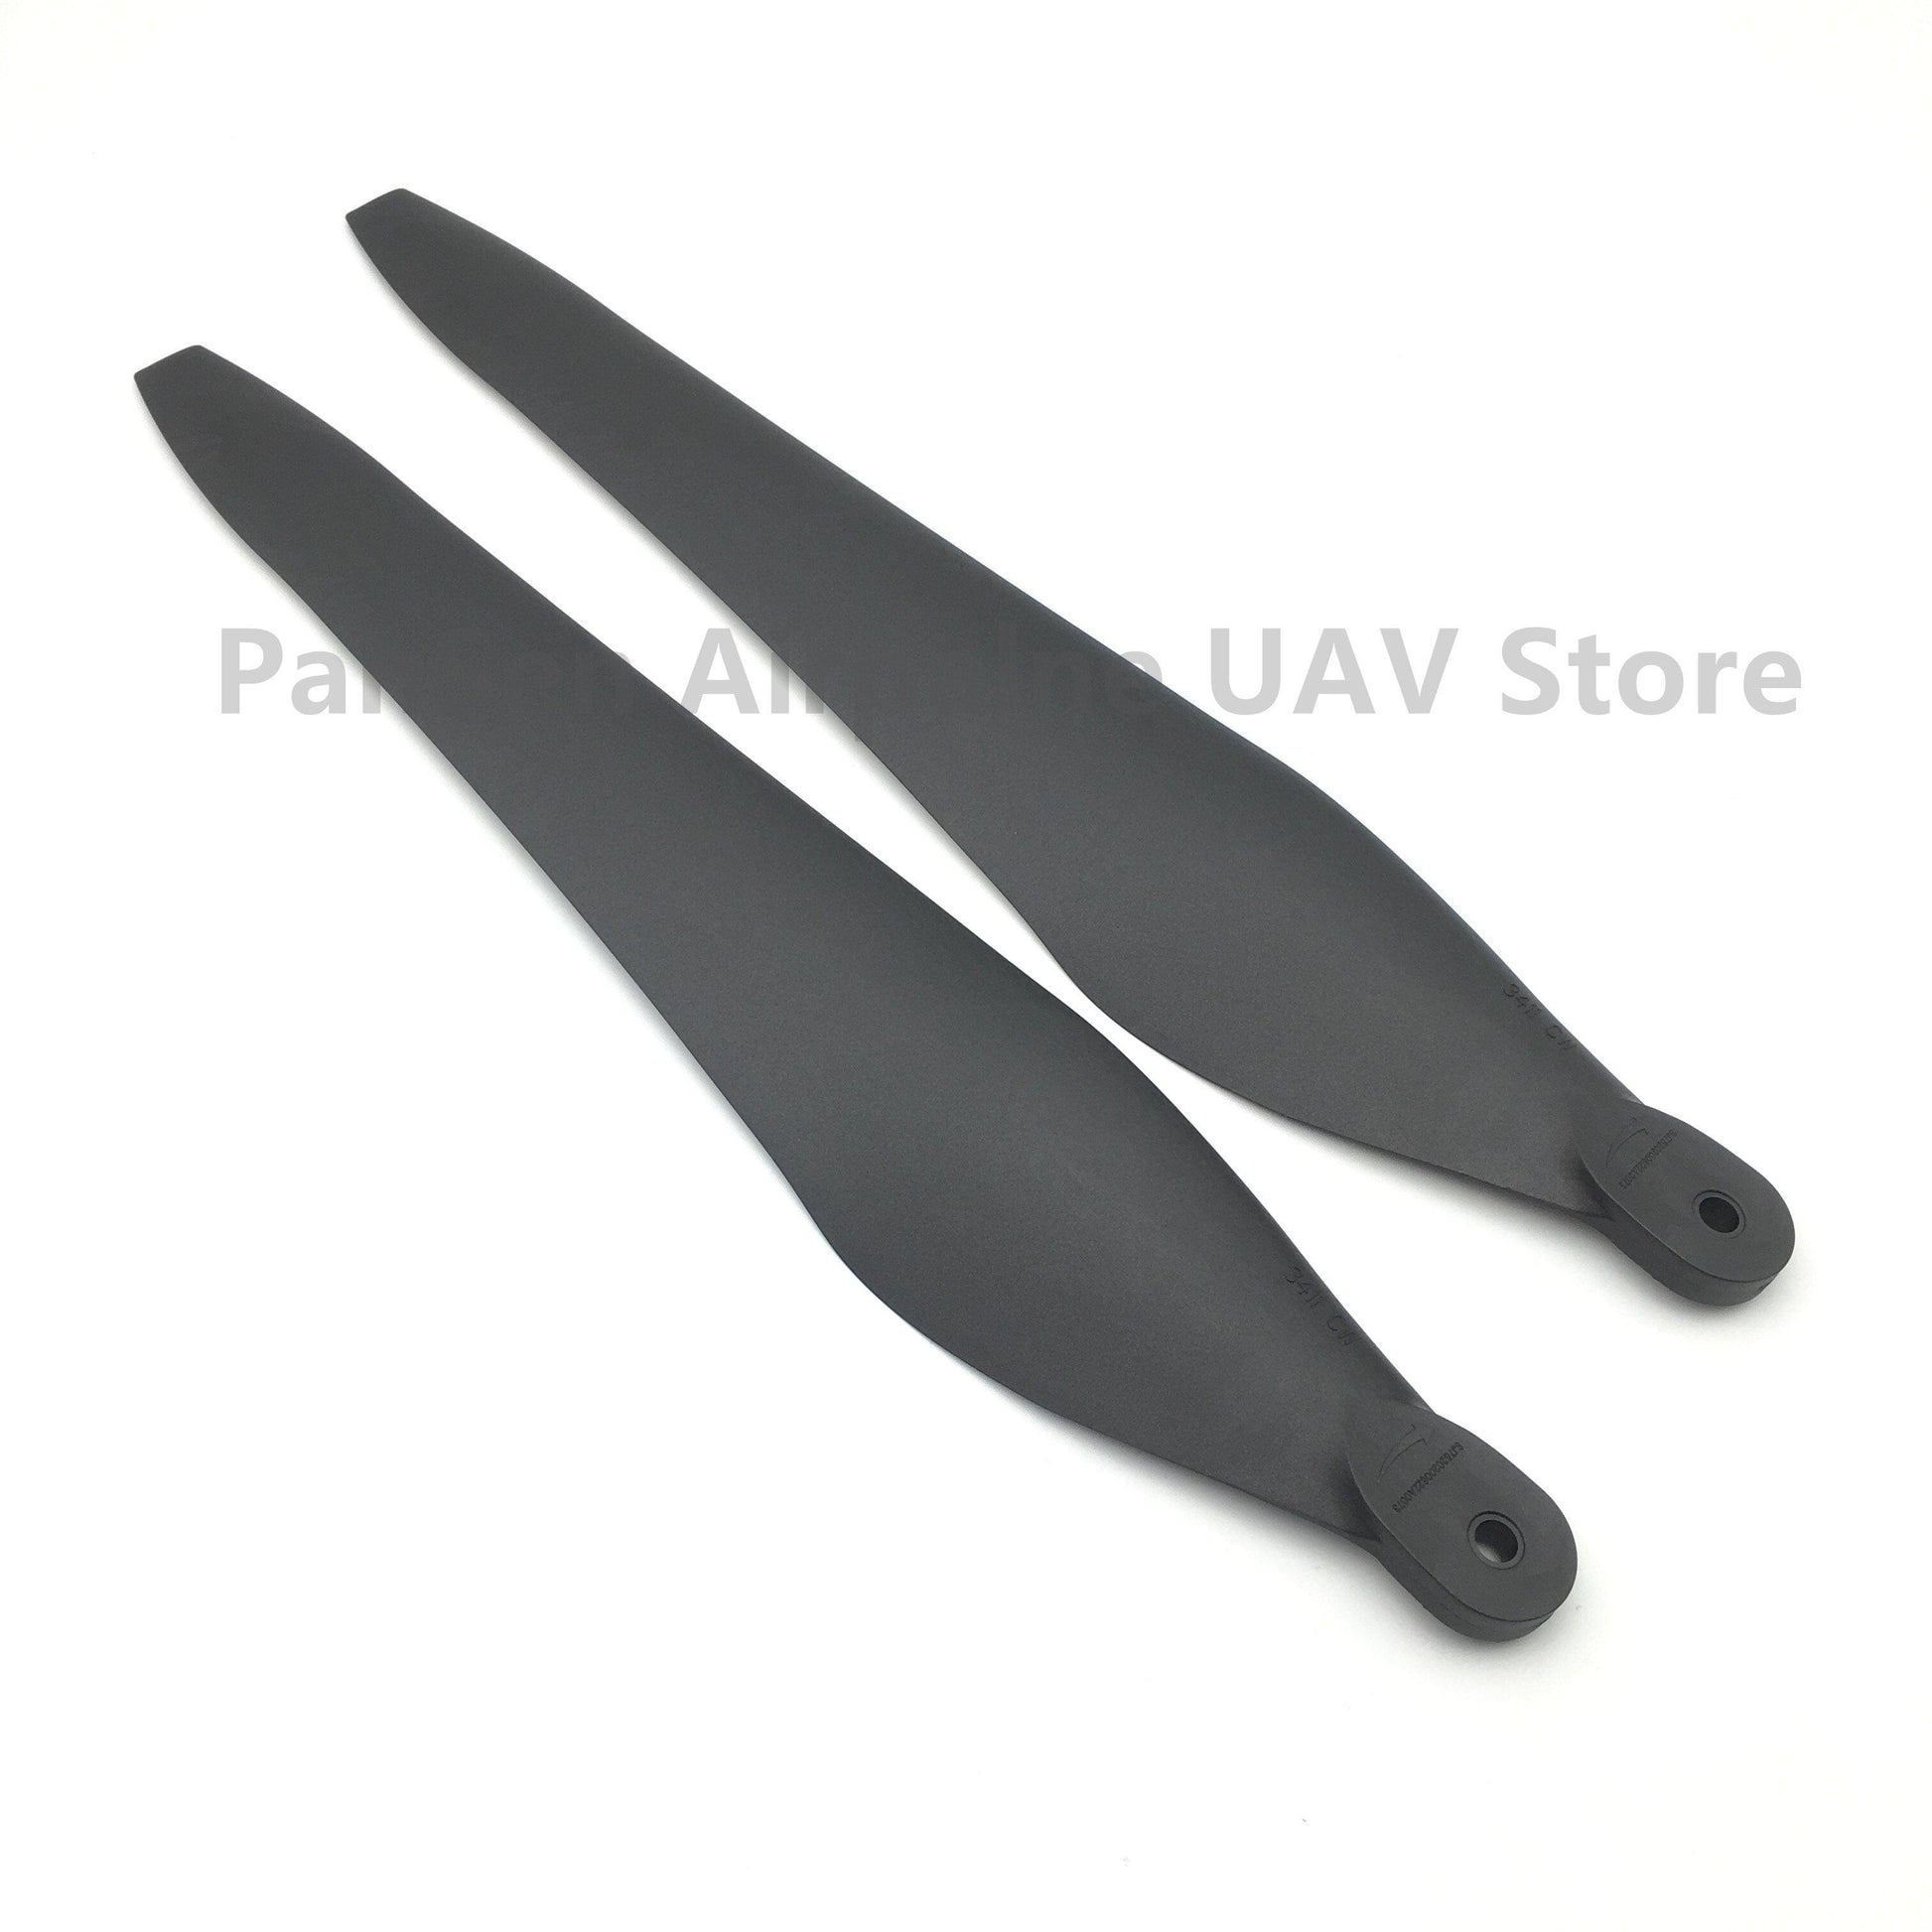 Original Hobbywing FOC folding Carbon Fiber Plastic 3411 CW CCW Propeller for the Power System of X9 Motor Agricultural Drone - RCDrone